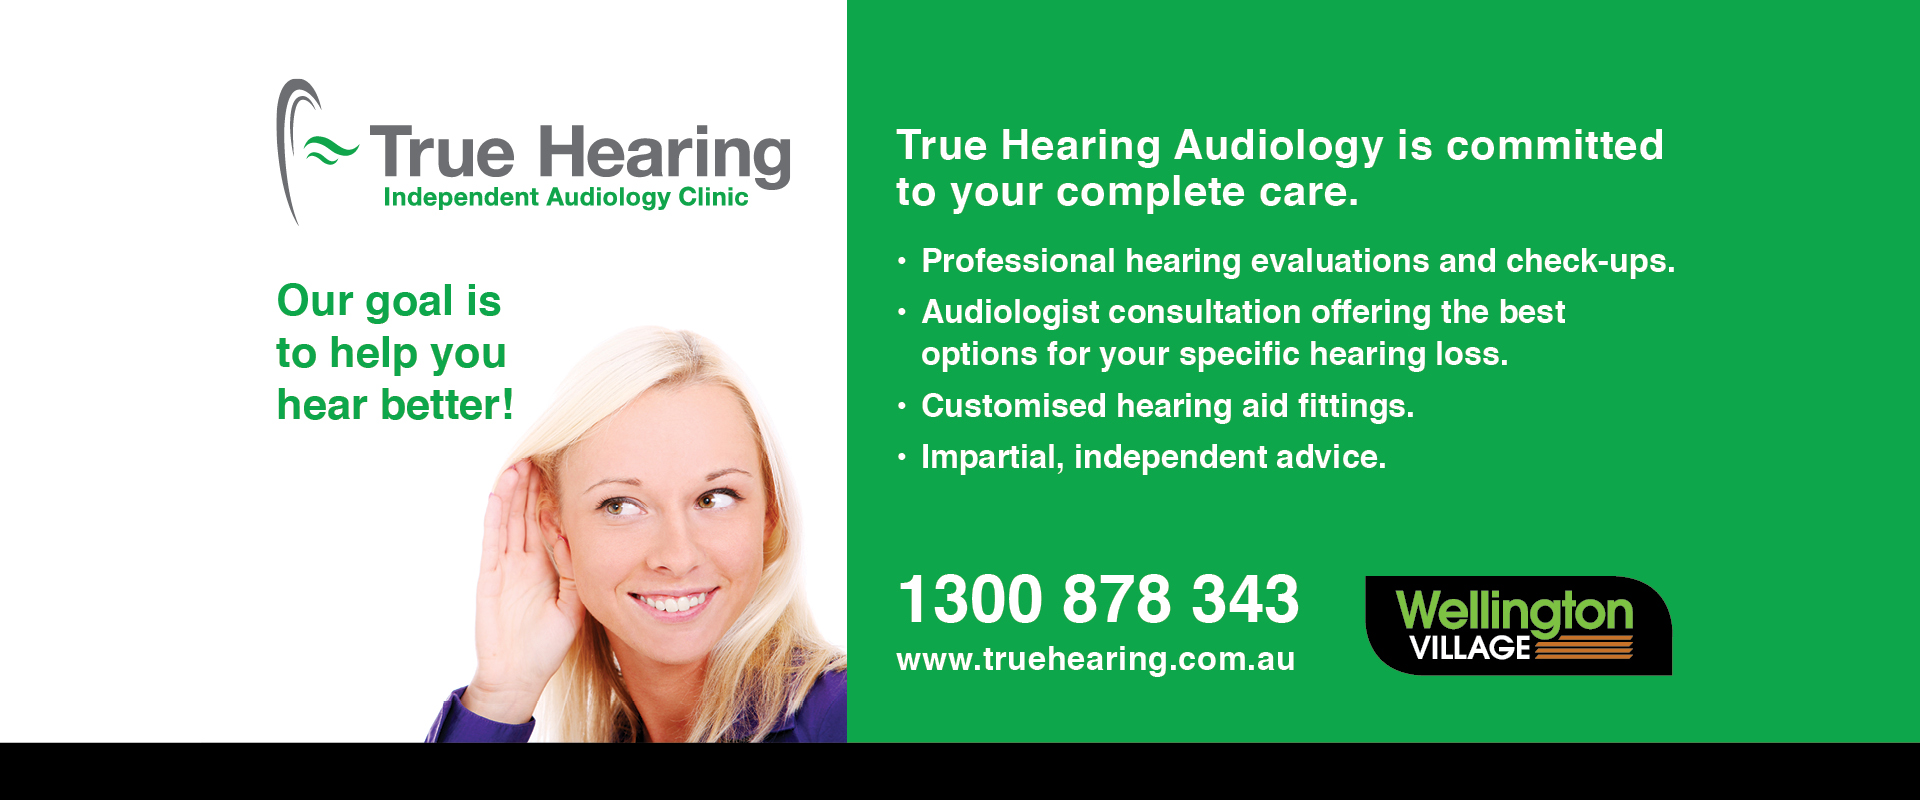 ad for True Hearing audiology clinic